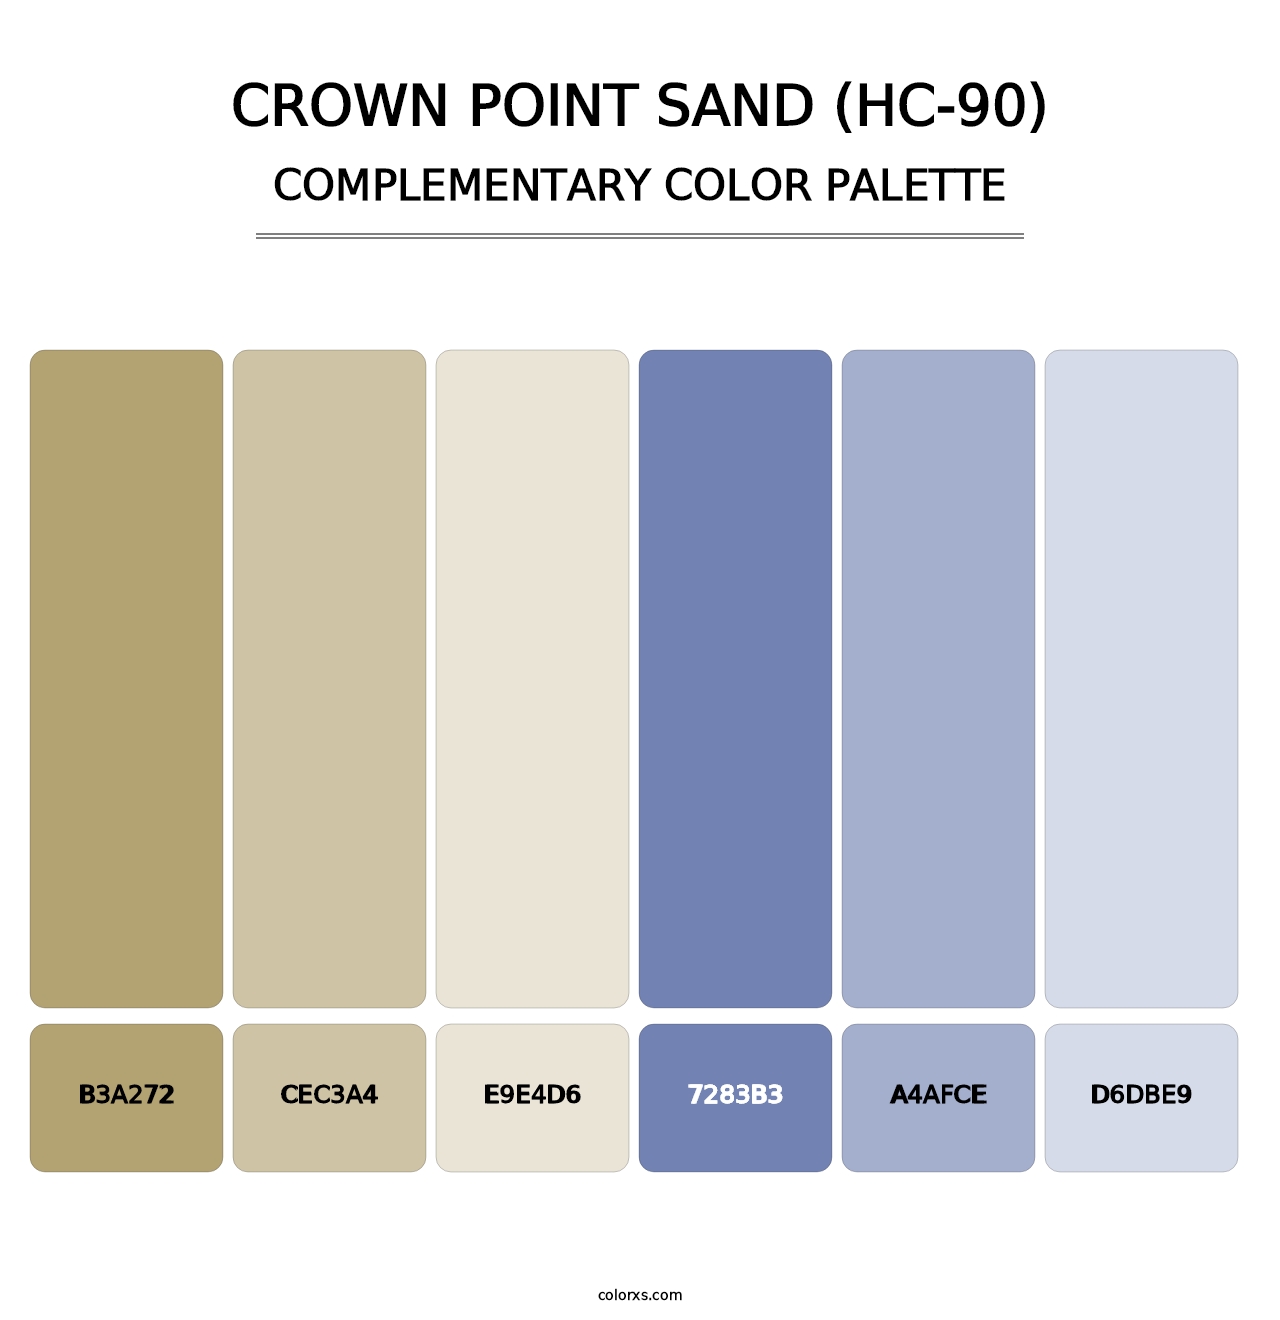 Crown Point Sand (HC-90) - Complementary Color Palette